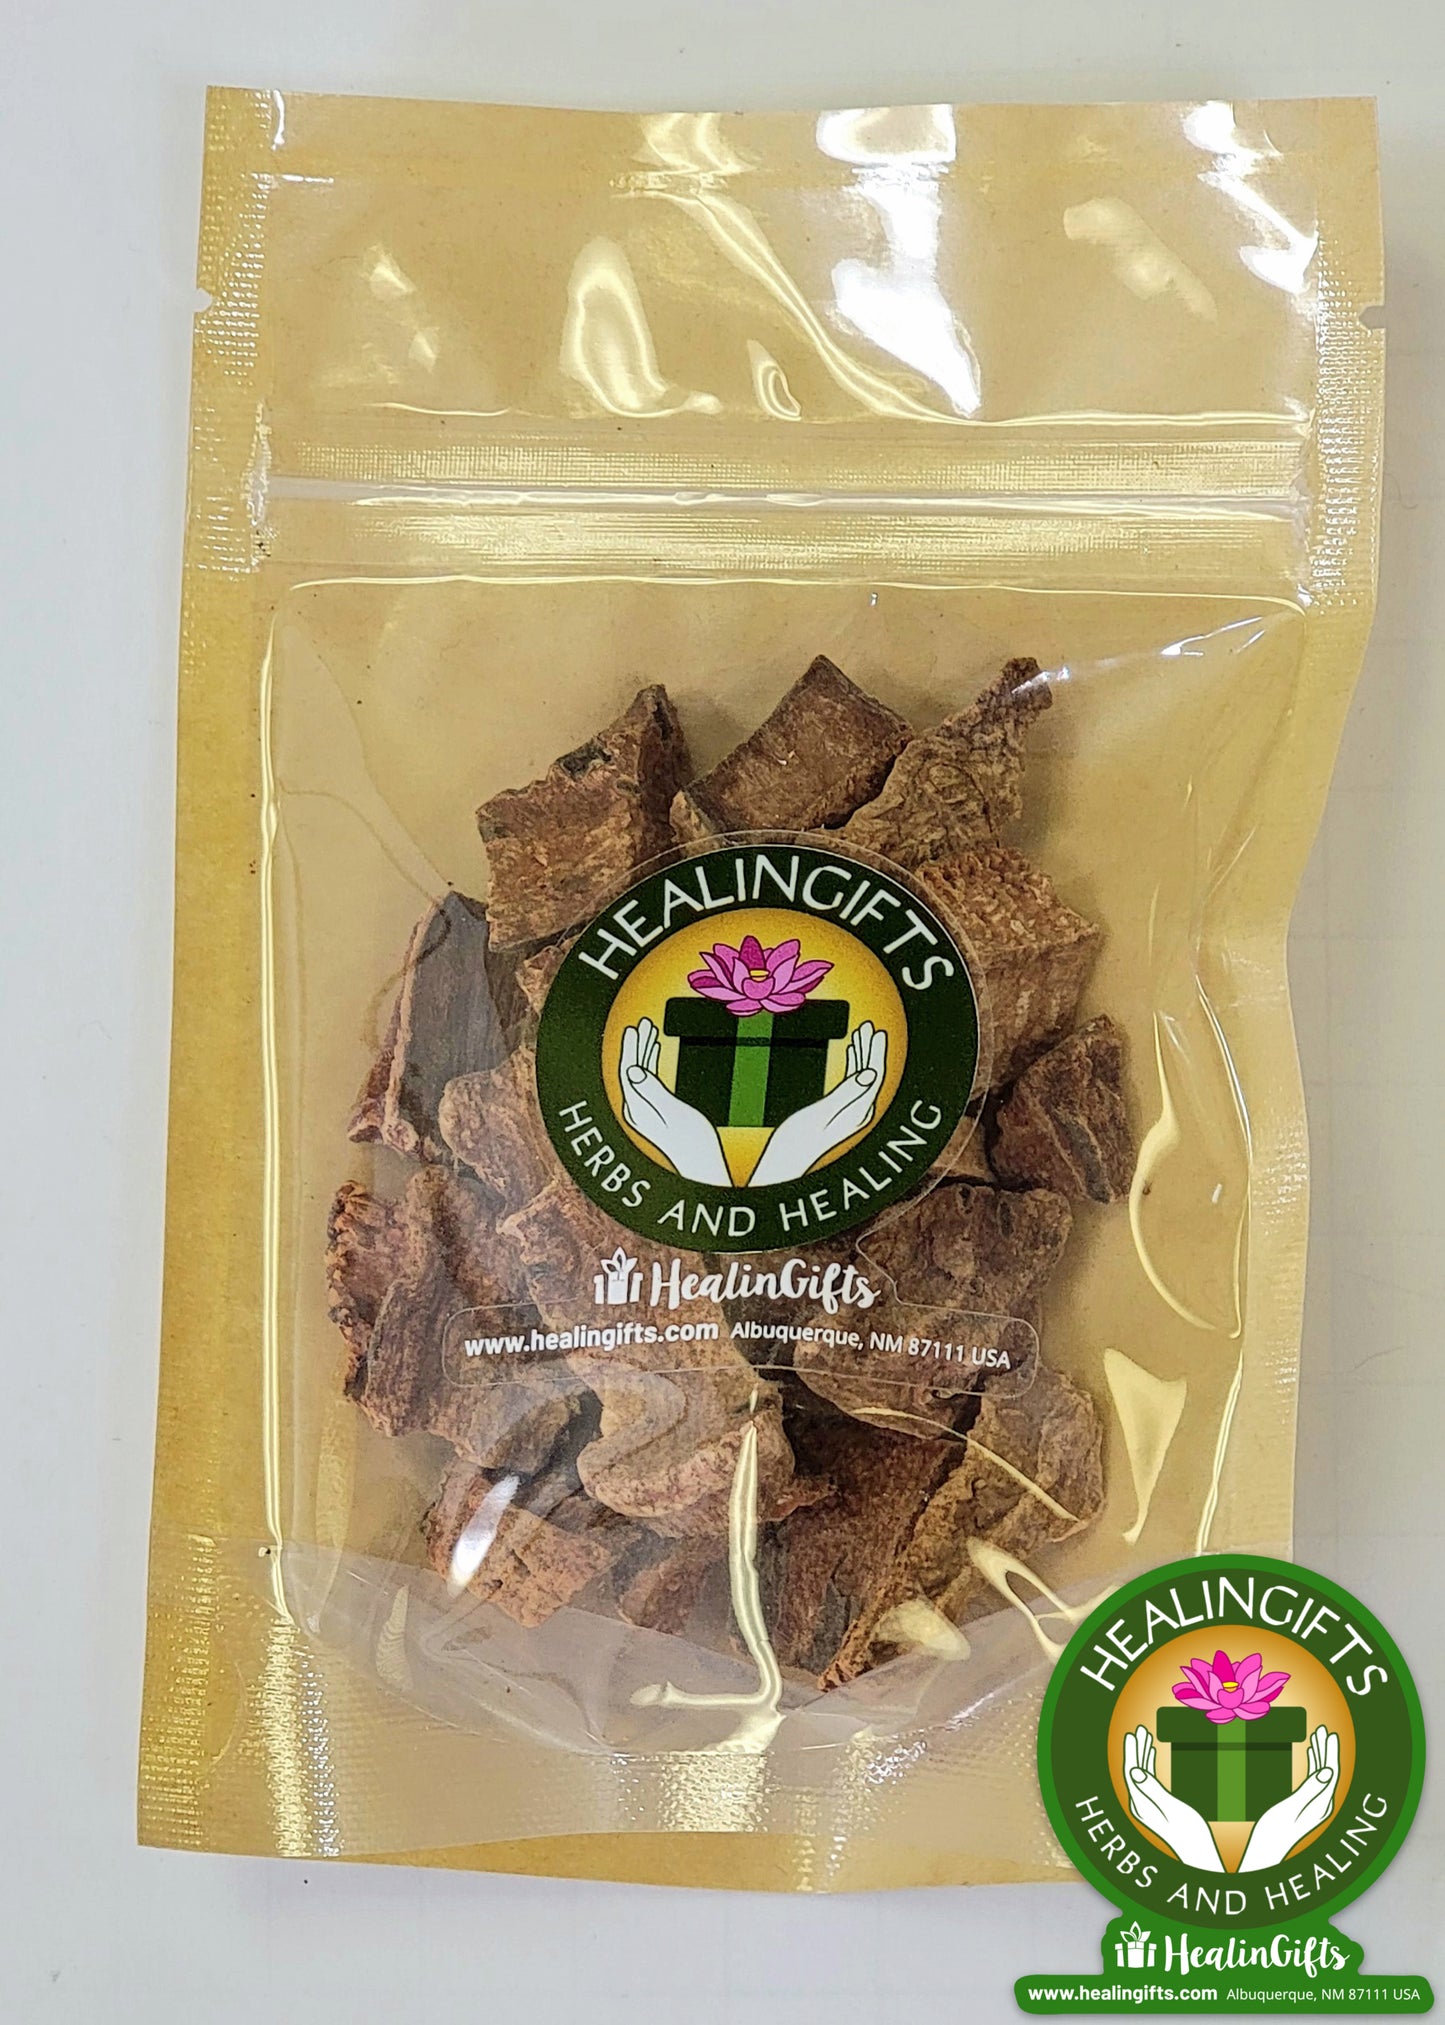 Cinchona Bark Quina Roja hardwood chips sourced from Mexico